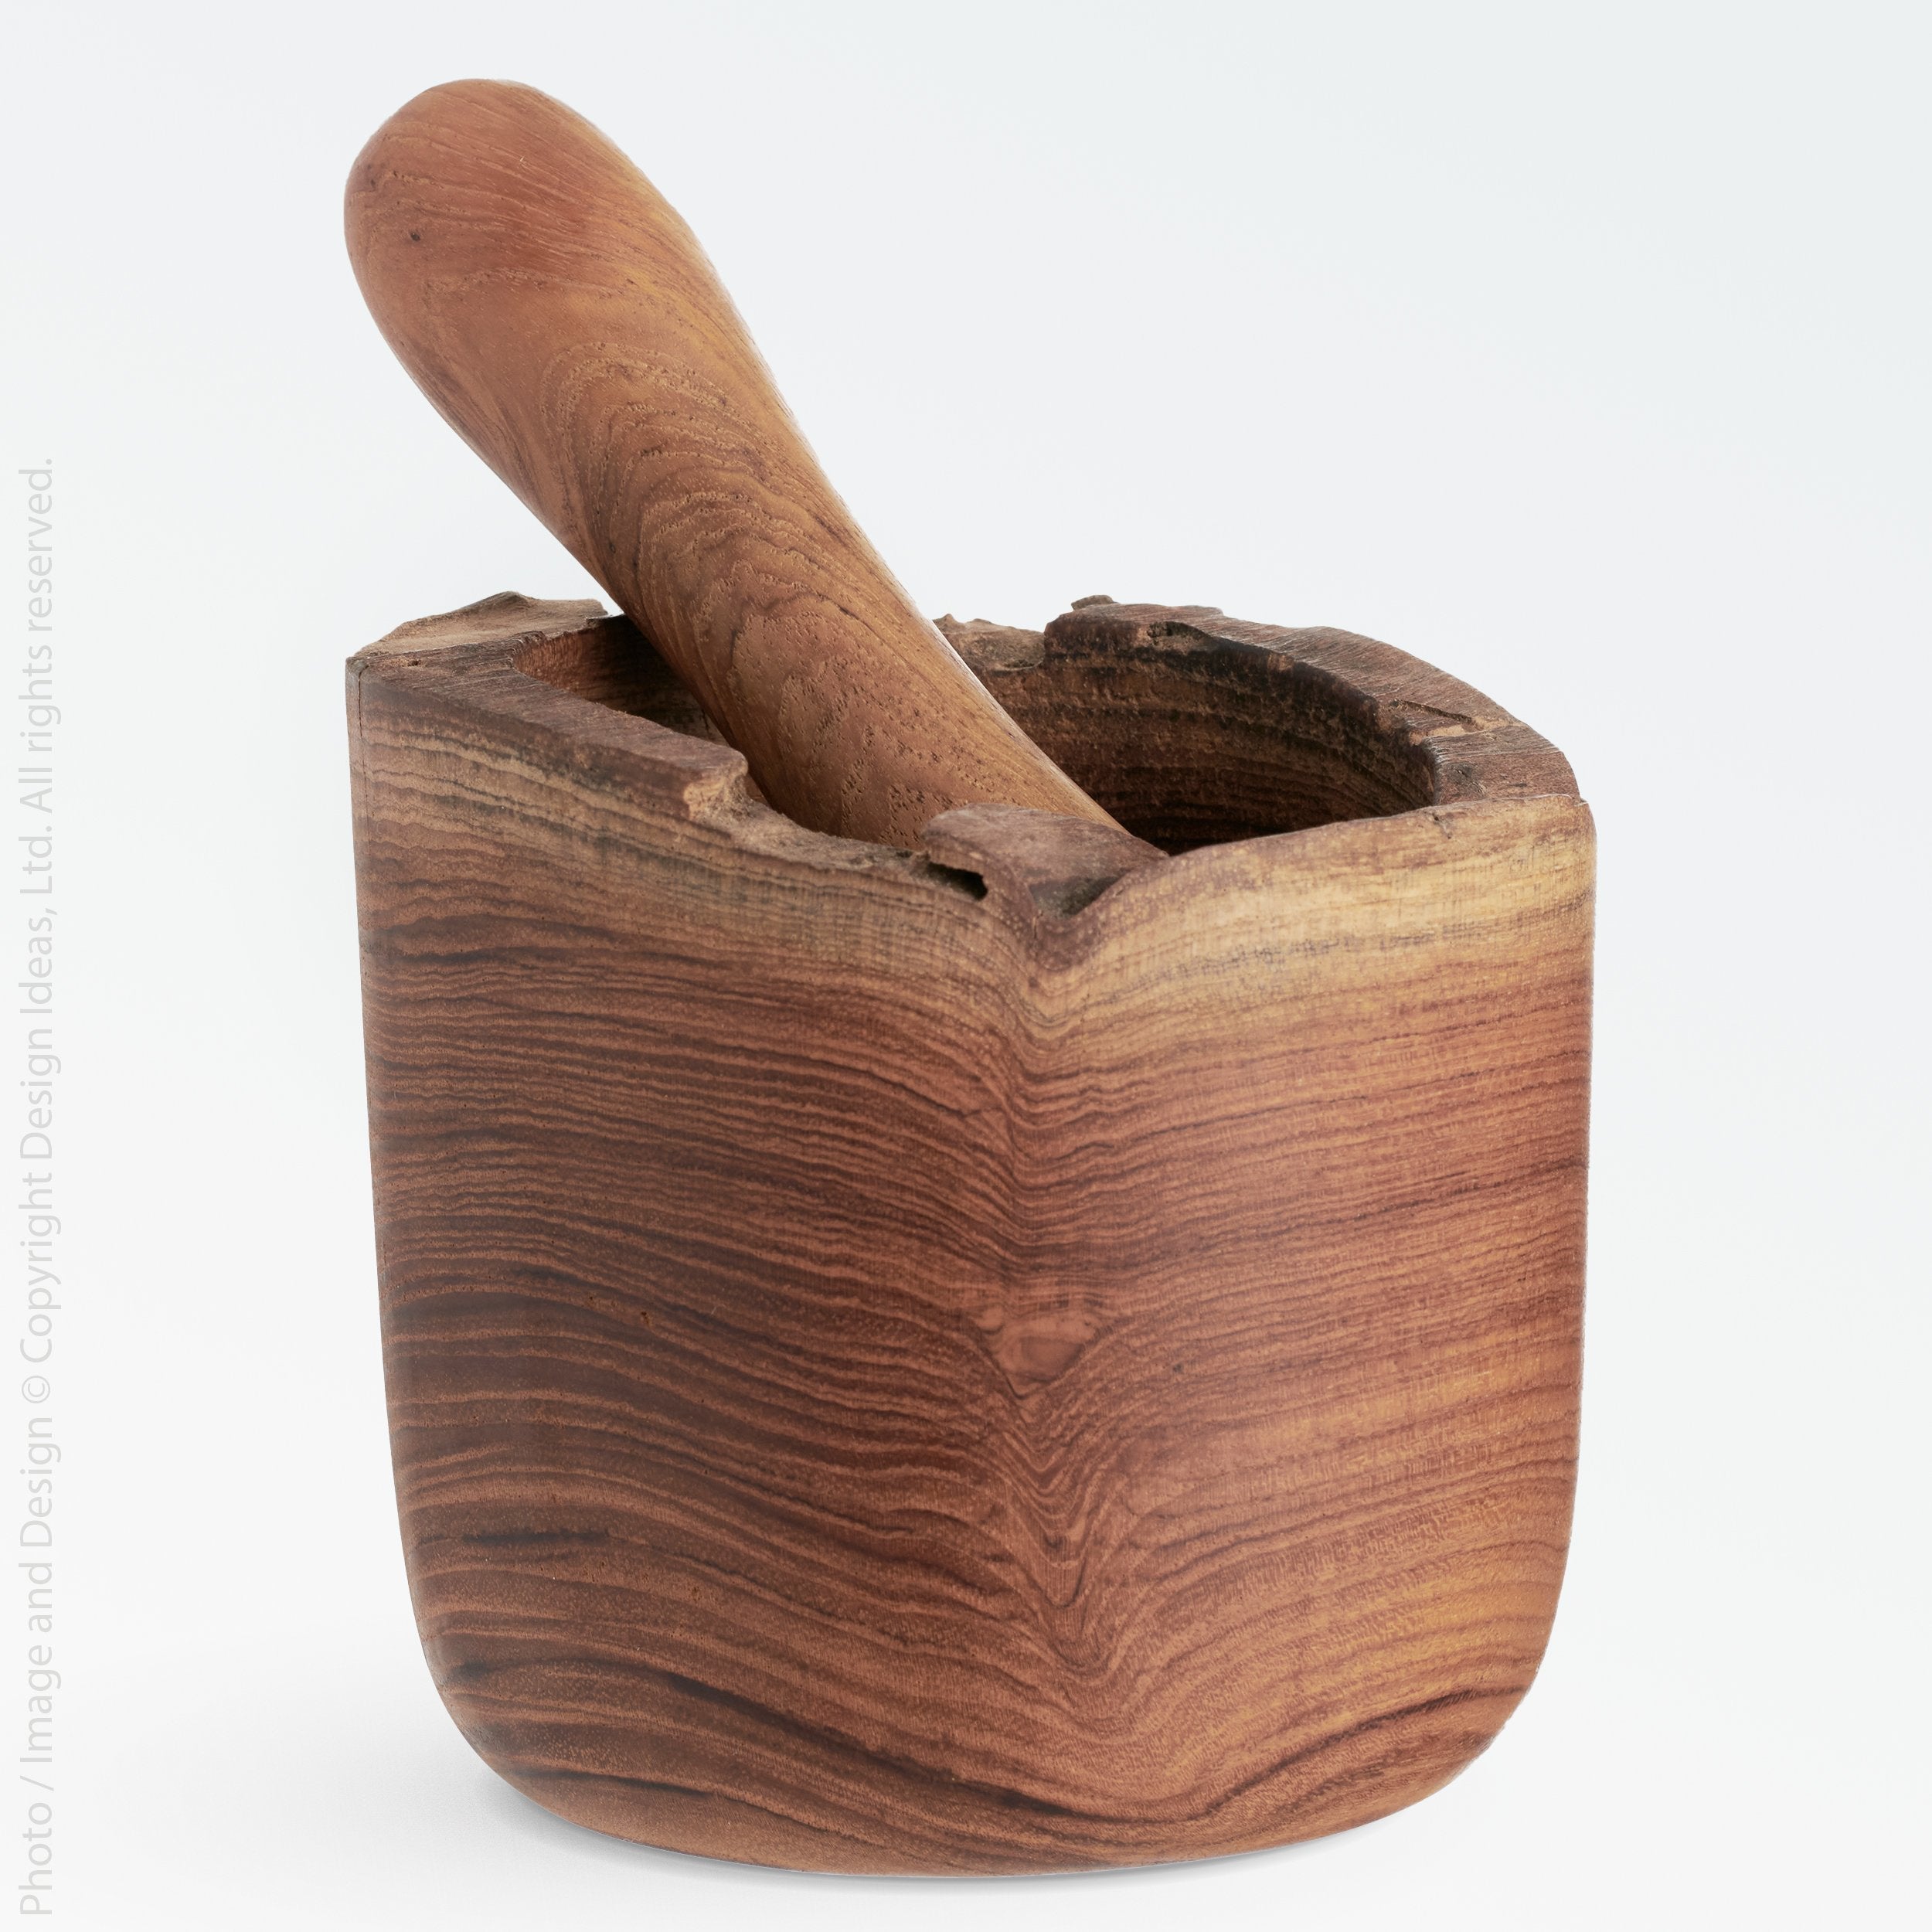 Takara Teak Root Mortar & Pestle - Black Color | Image 1 | From the Takara Collection | Elegantly handmade with natural teak root for long lasting use | This bowl is sustainably sourced | Available in natural color | texxture home